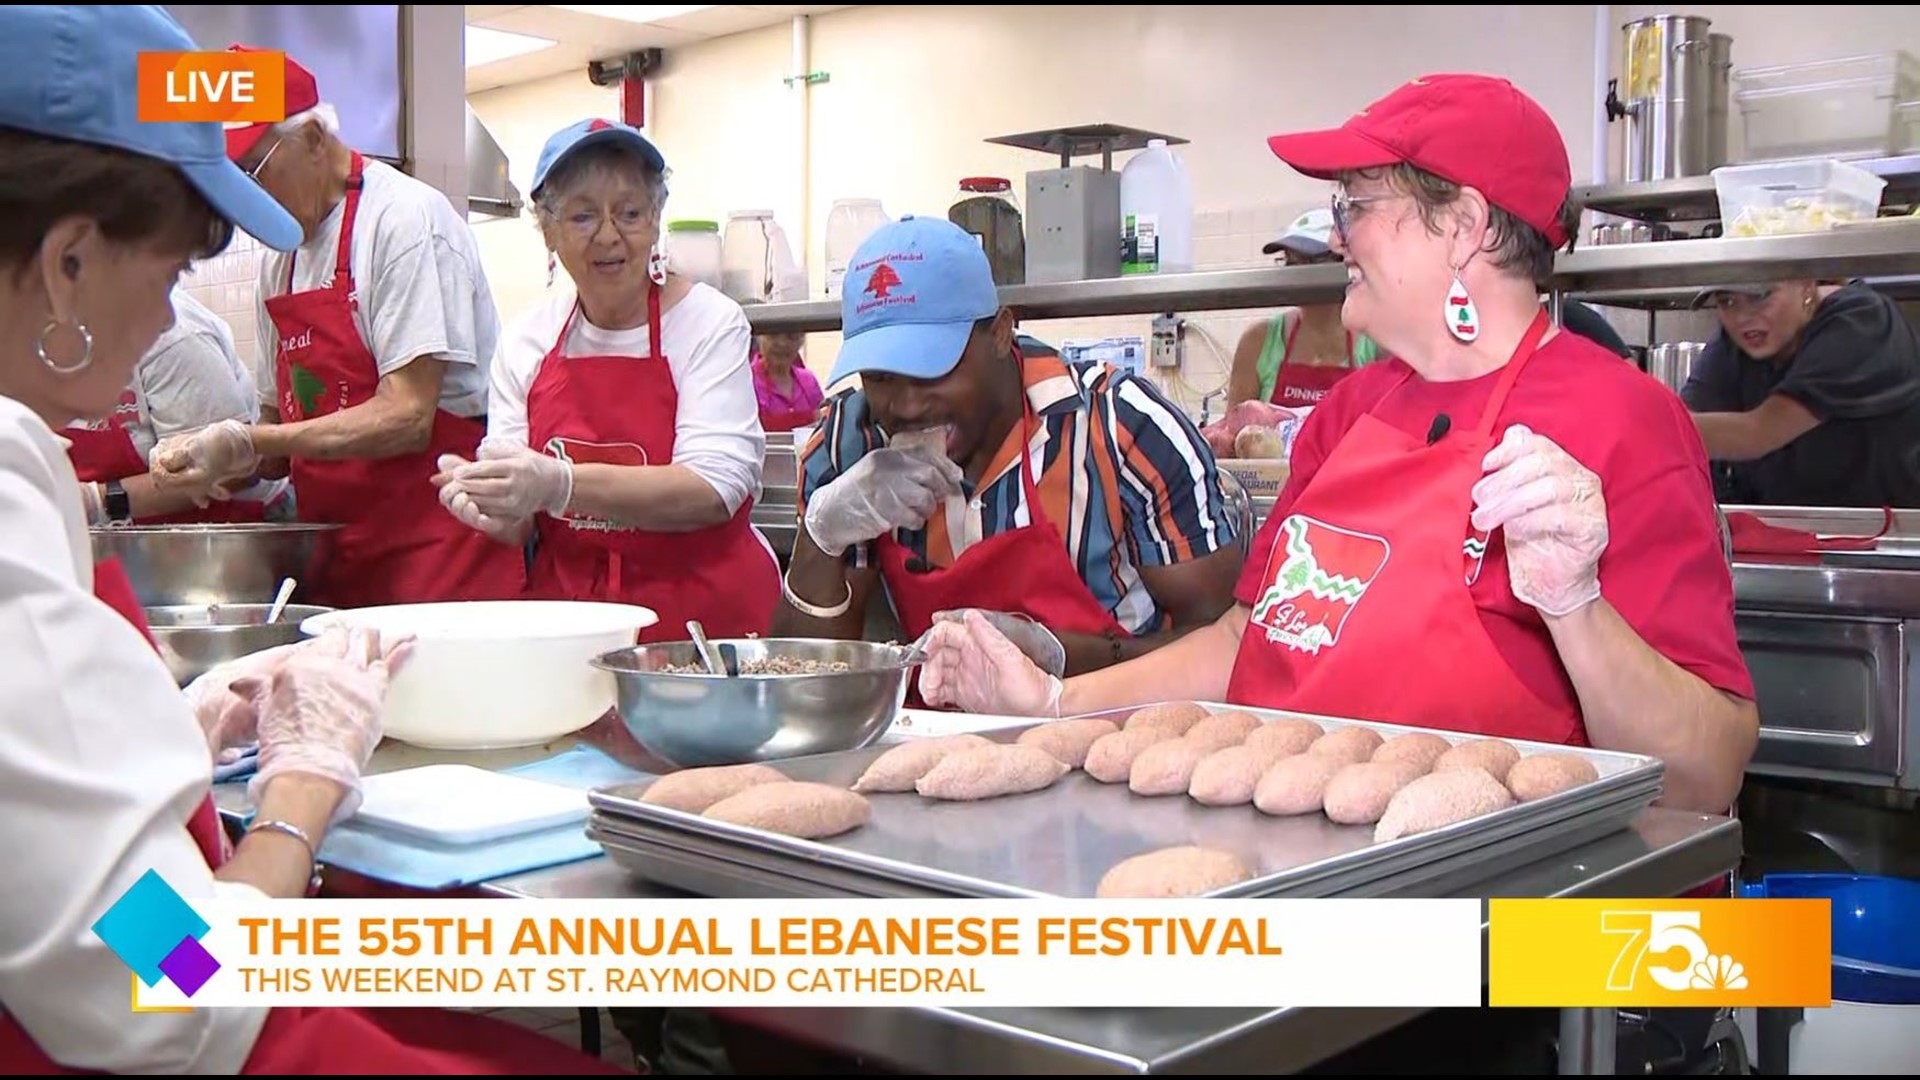 Malik Wilson stopped by the St. Raymond's kitchen to learn how to make authentic Lebanese dishes and find out more about the annual festival.